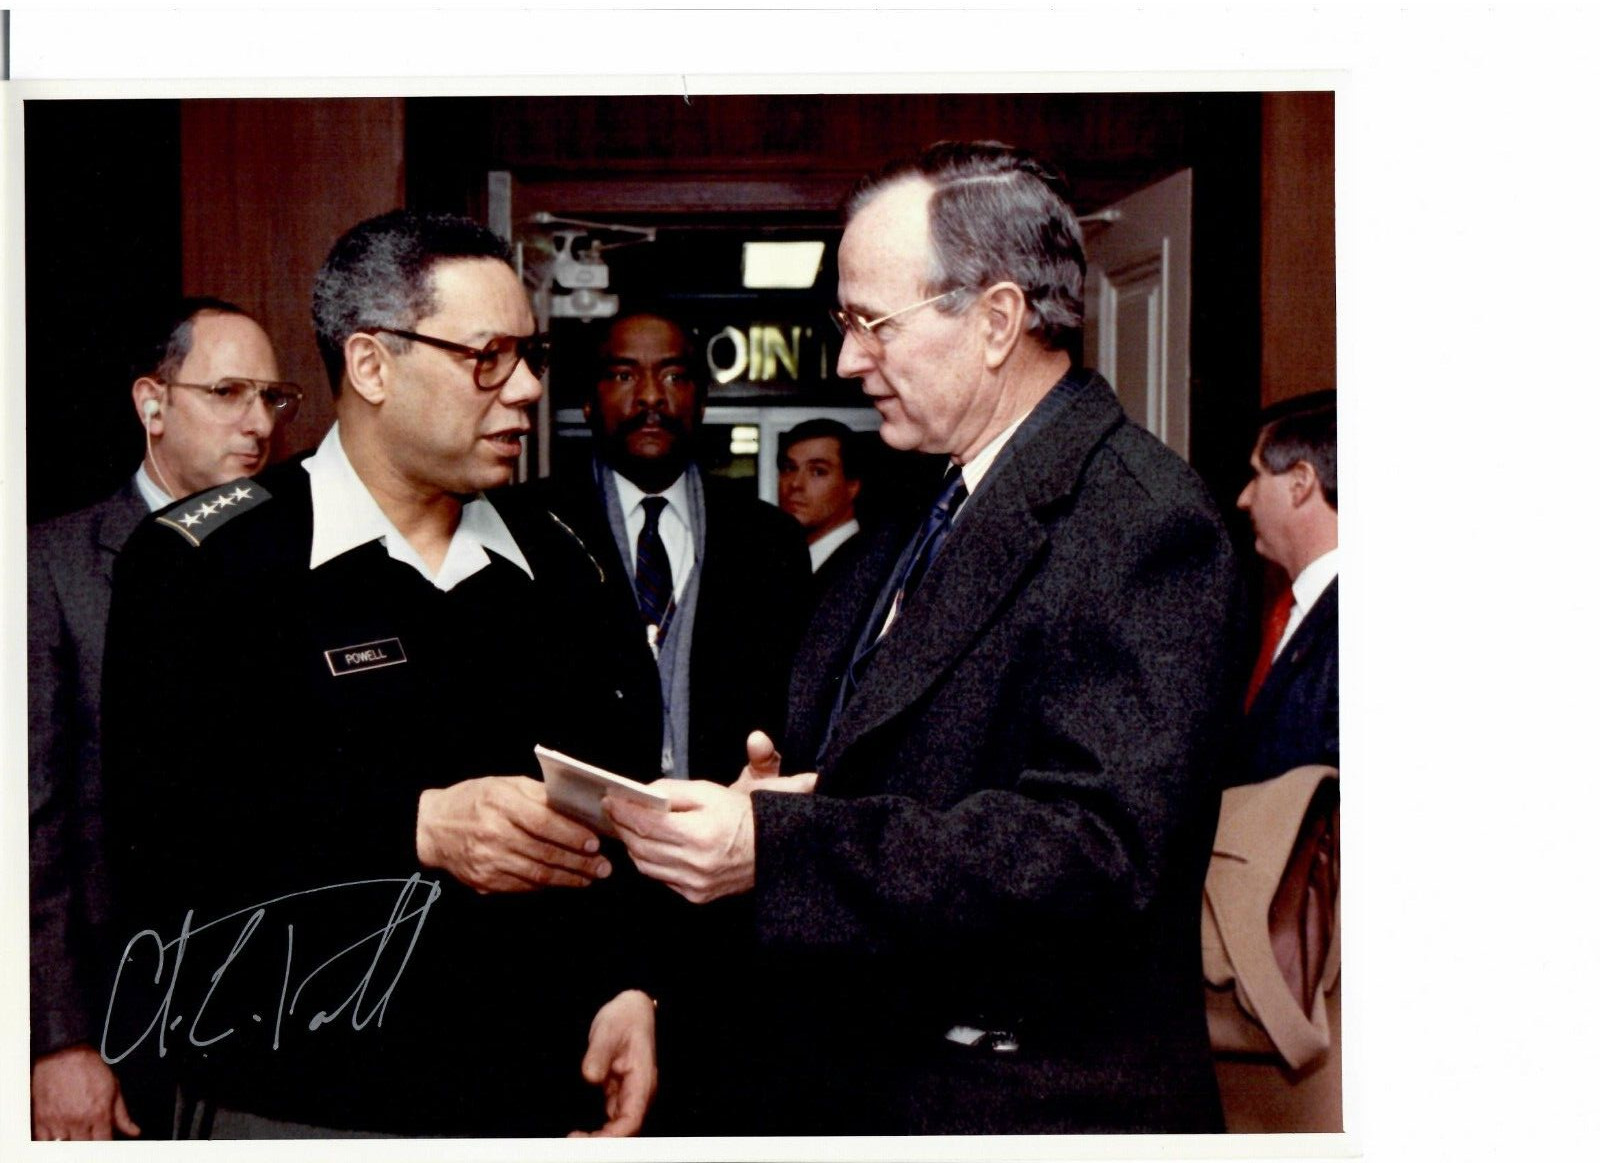 GENERAL COLIN POWELL, AUTOGRAPHED 8x10 PHOTOGRAPH.